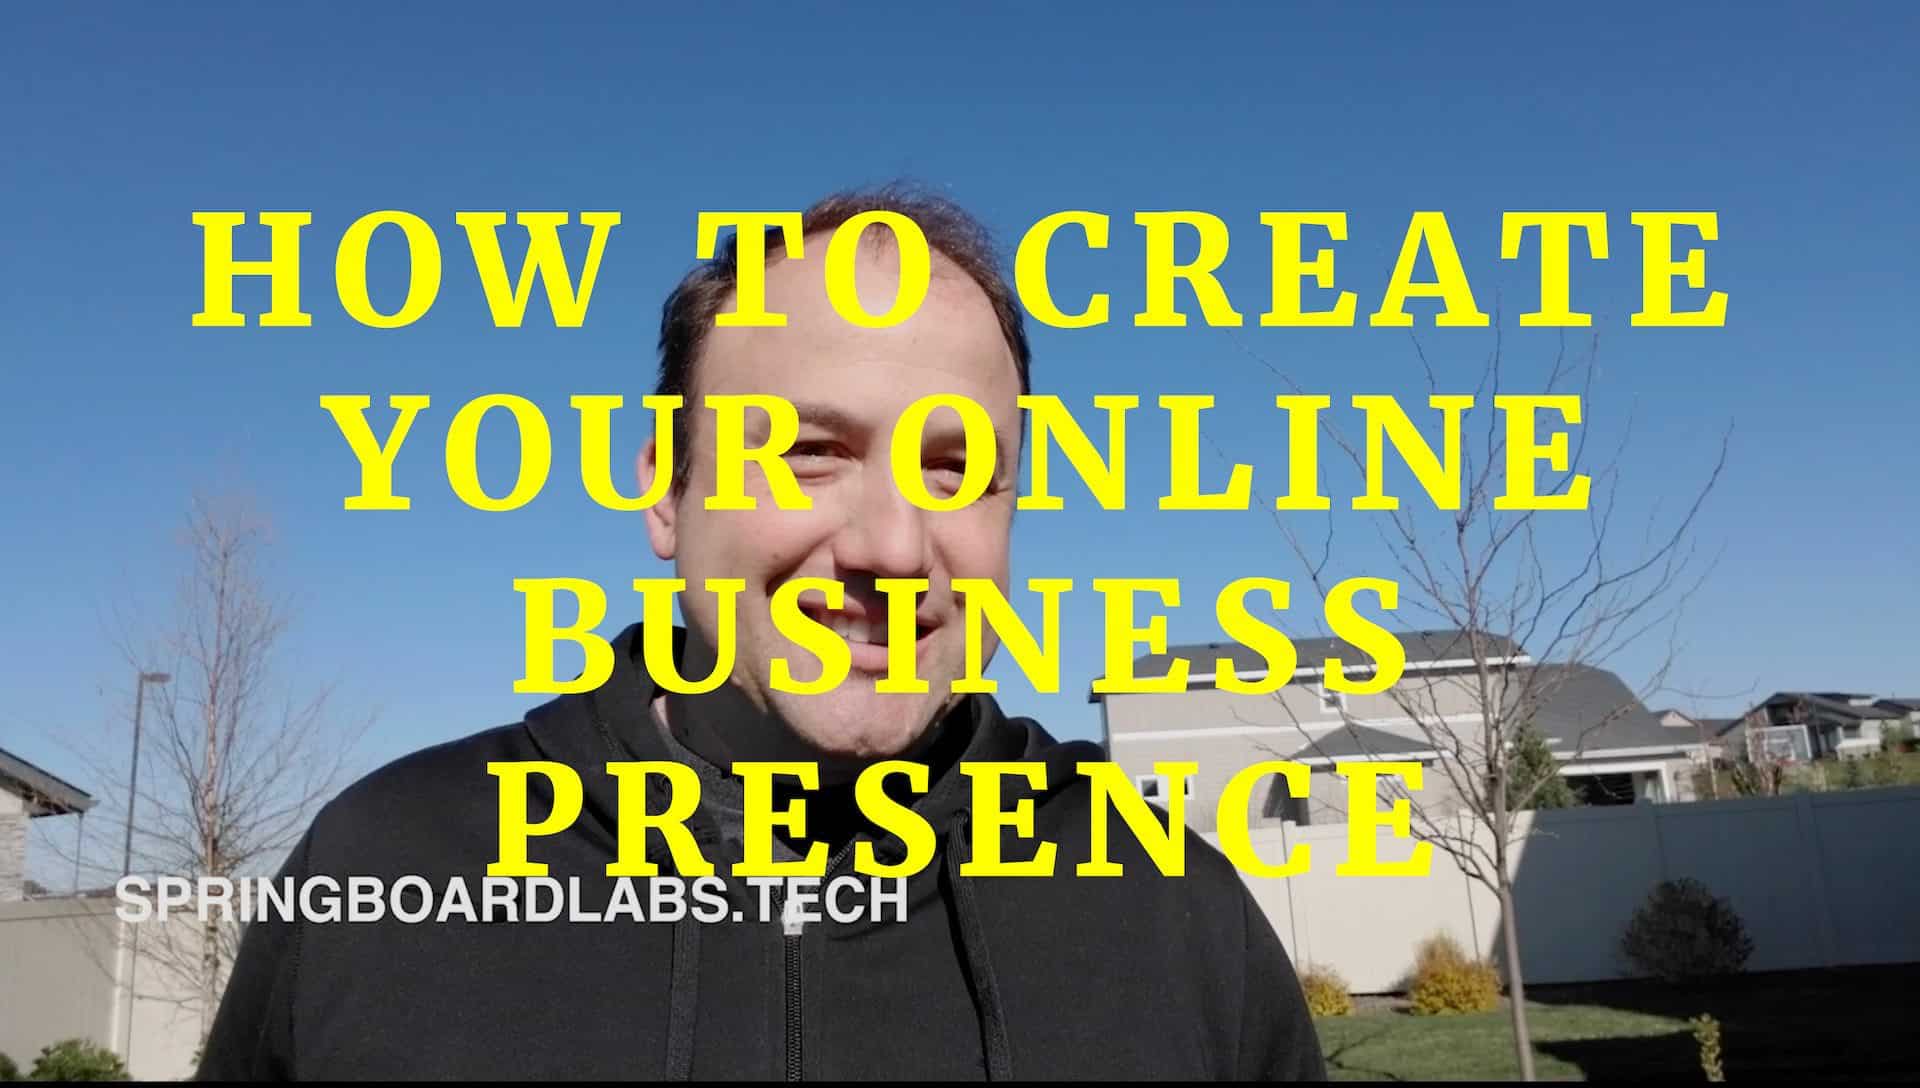 Man talking about How to create an online presence for your business